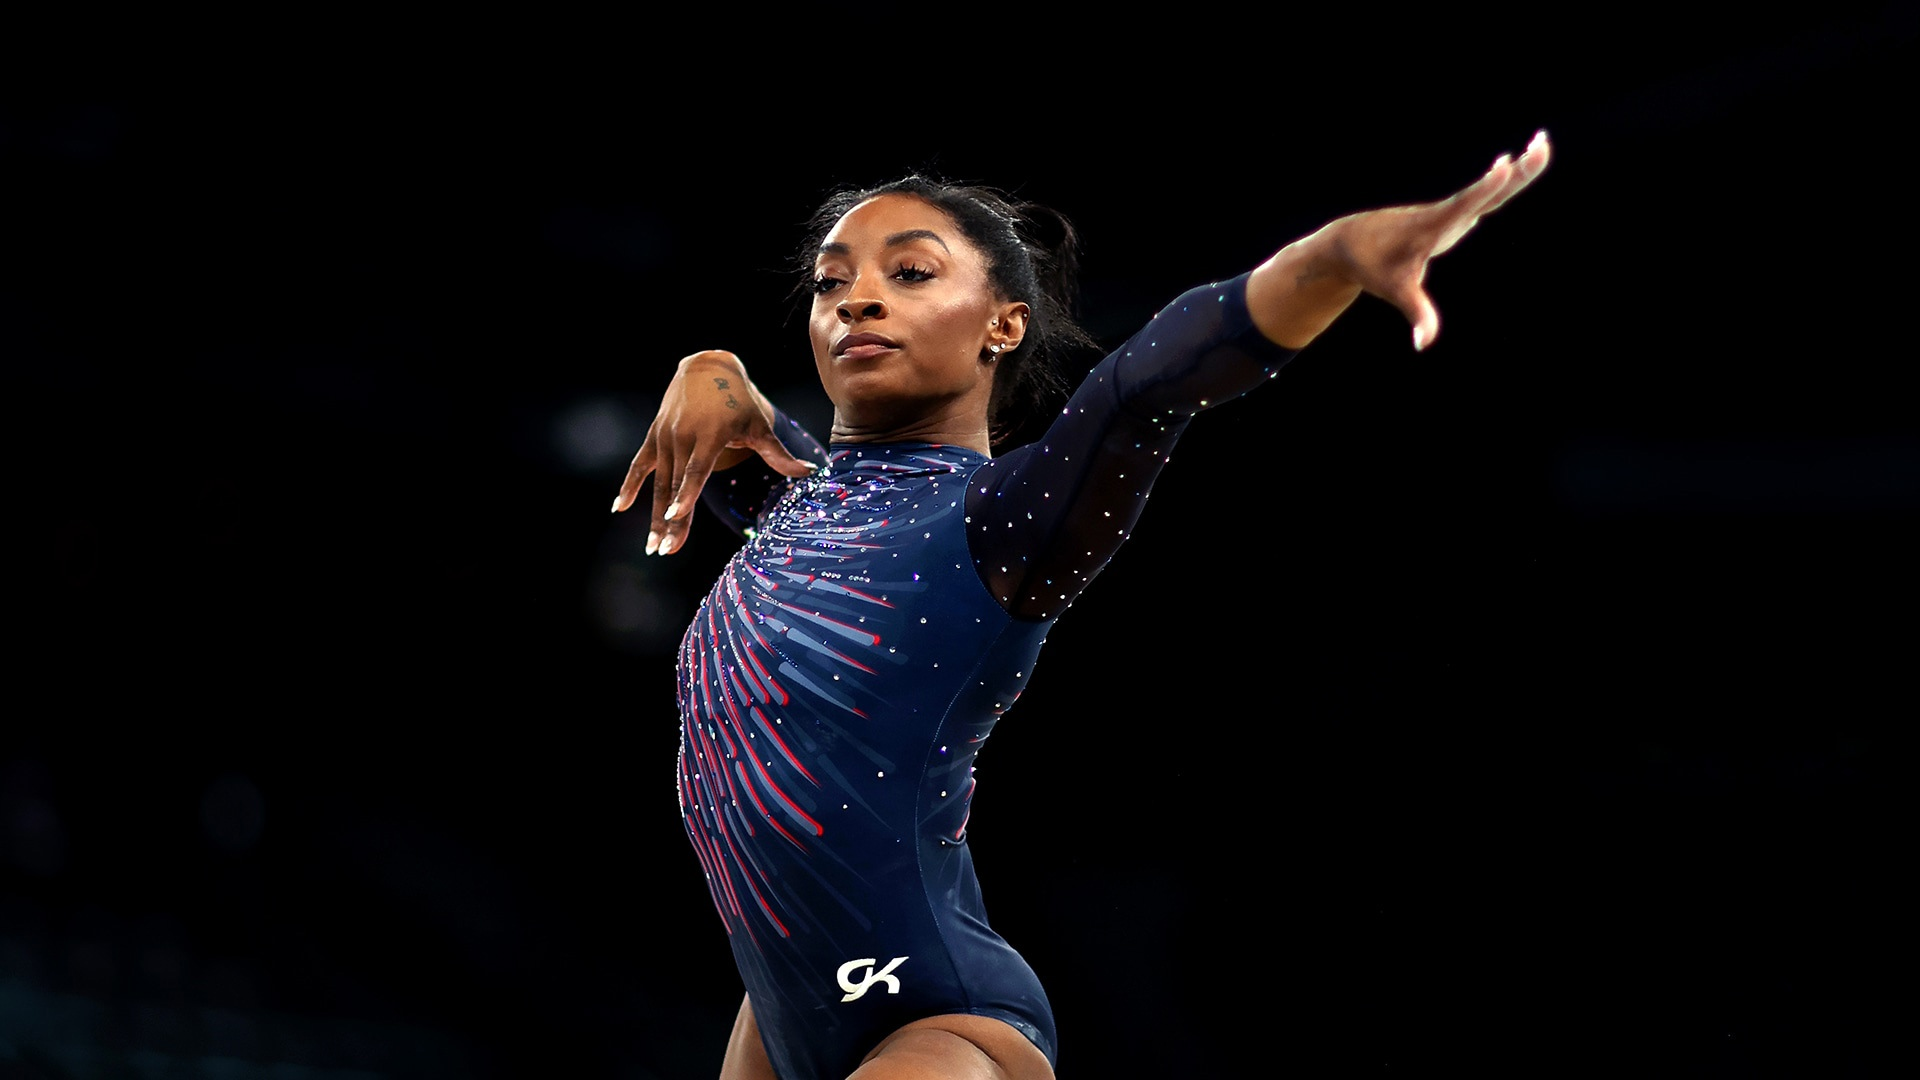 Team USA is favored to win the team gymnastics gold, with reigning champion Russia blocked from competing.